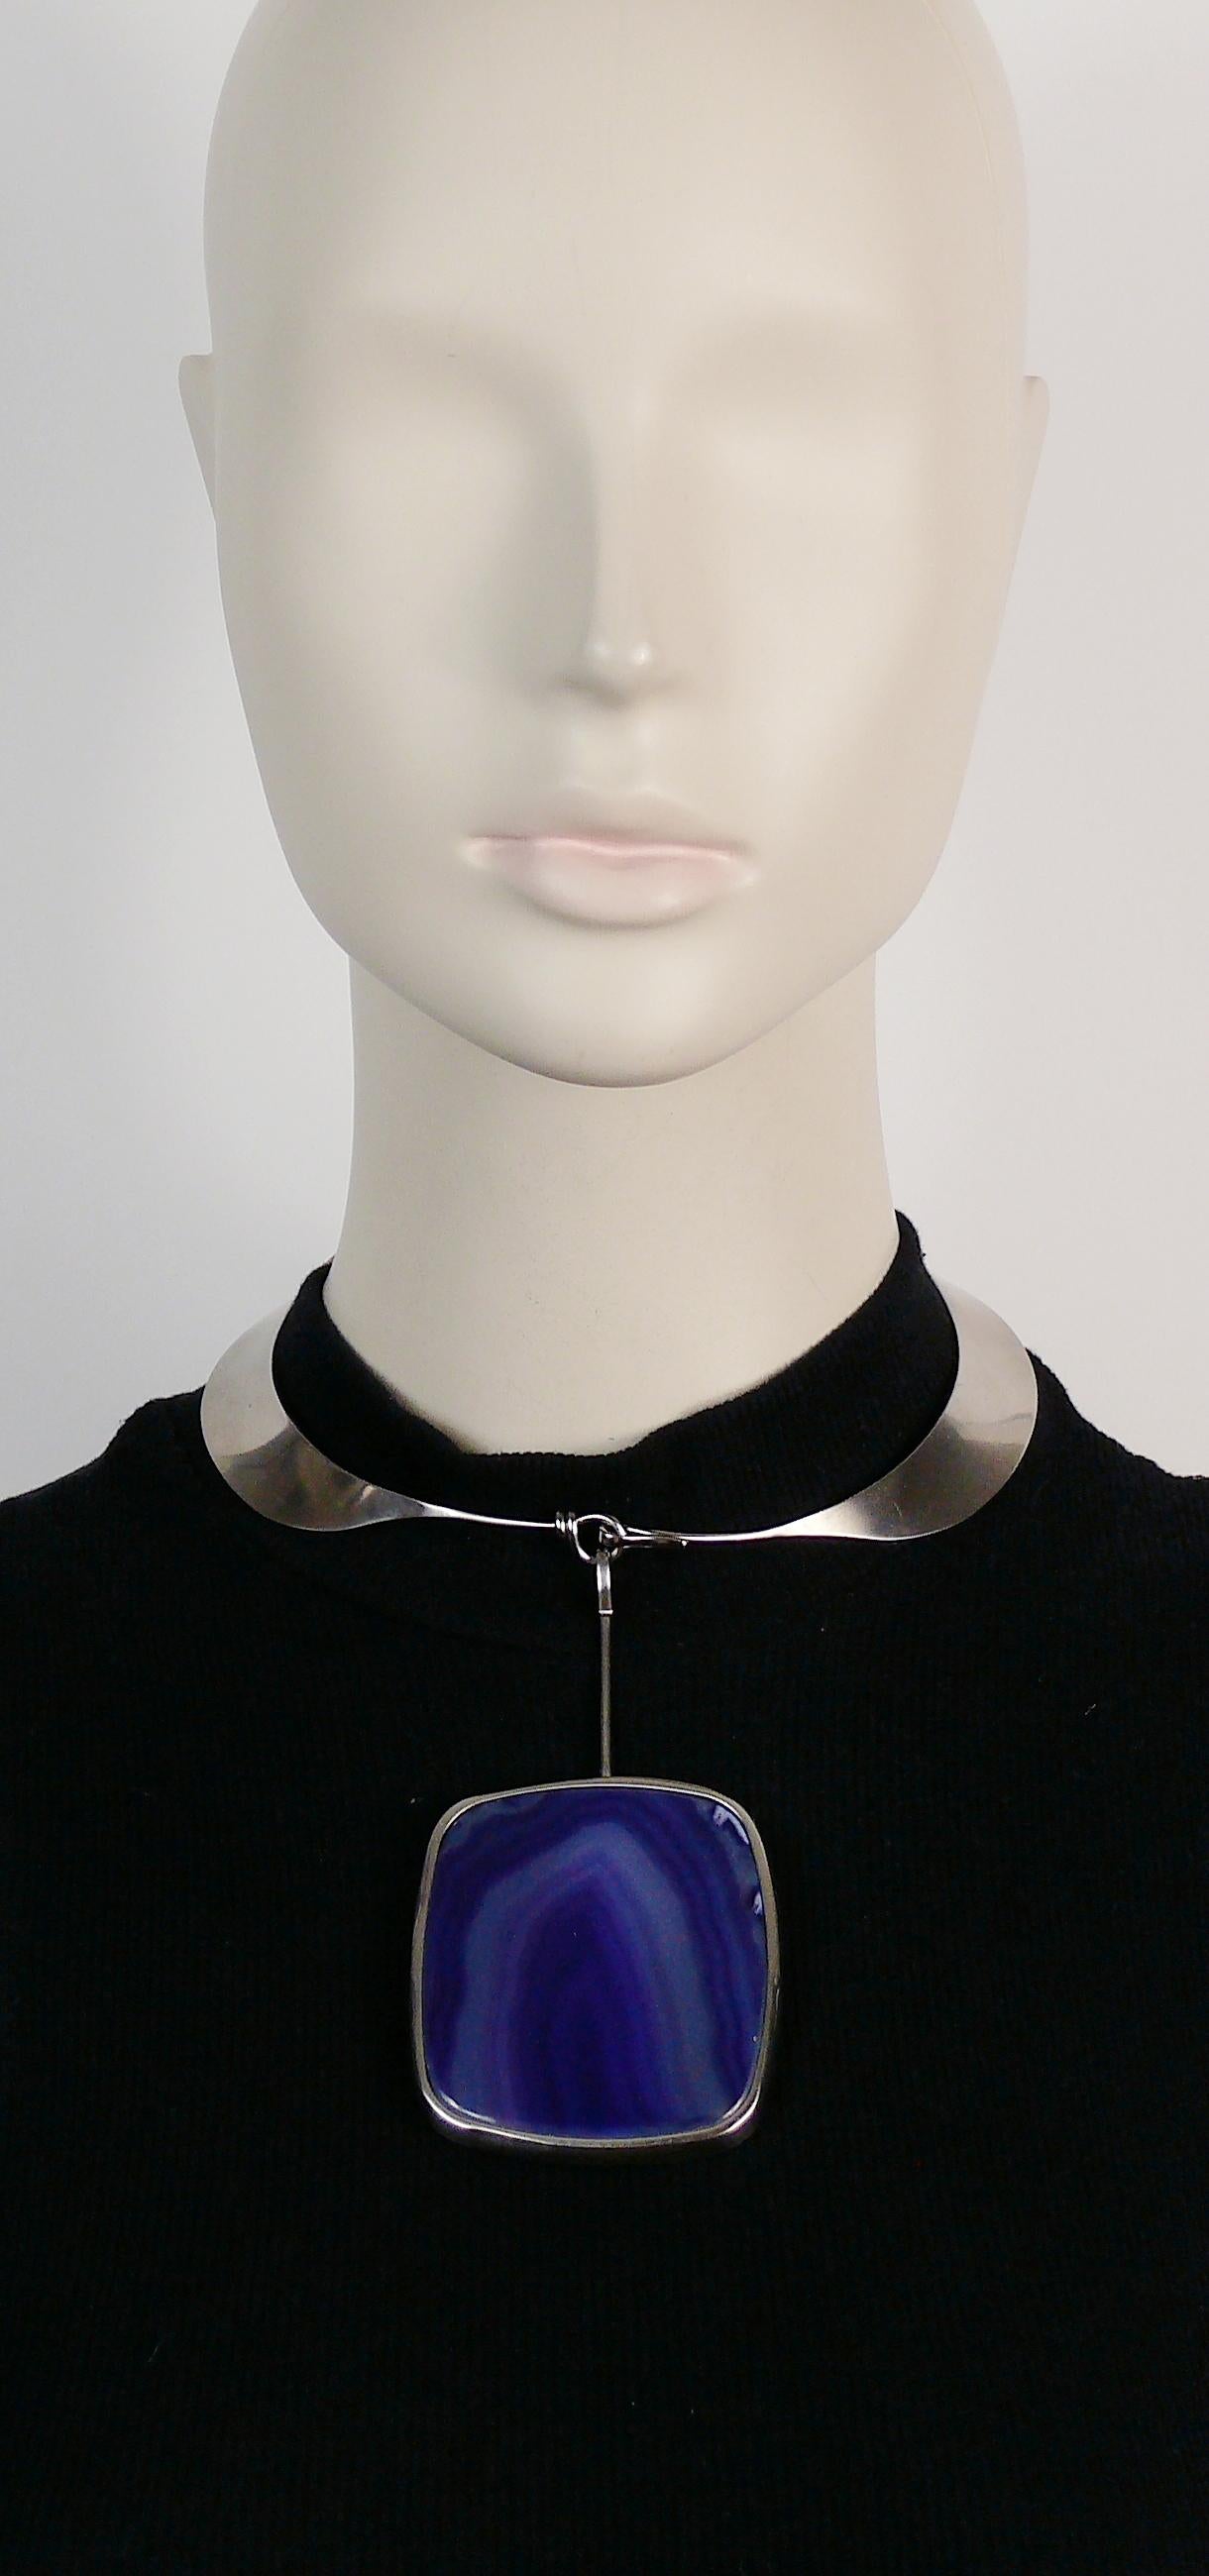 CHANEL silver toned modernist choker necklace featuring a gorgeous purple agate pendant.

Fall/Winter 2012 Collection.

Push button clasp.

Marked CHANEL B12 A Made in Italy.
Embossed CHANEL.
Privale sale S mark on the reverse of the choker (not